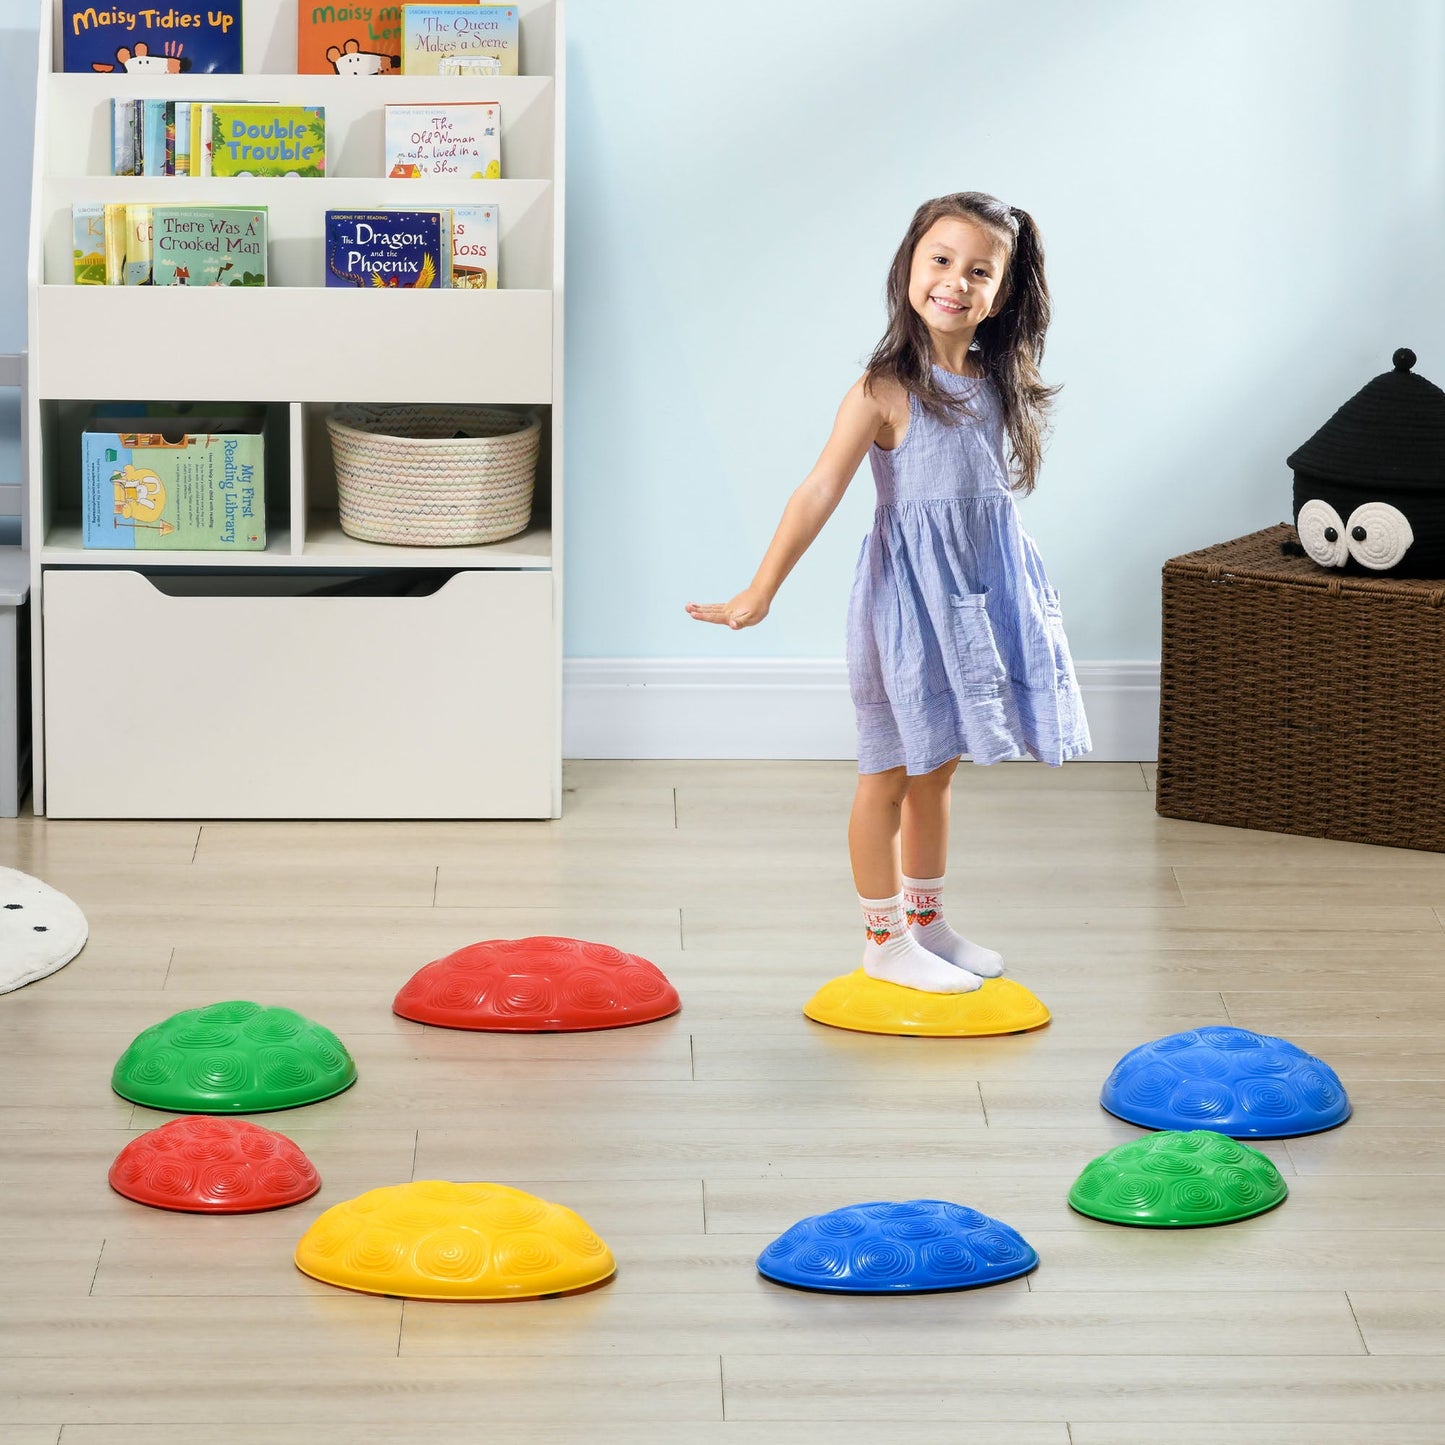 ZONEKIZ 8 Piece Kids Stepping Stones with Non-Slip Mats, Balance River Stones Indoor Outdoor Sensory Toys for 3-8 Years Old